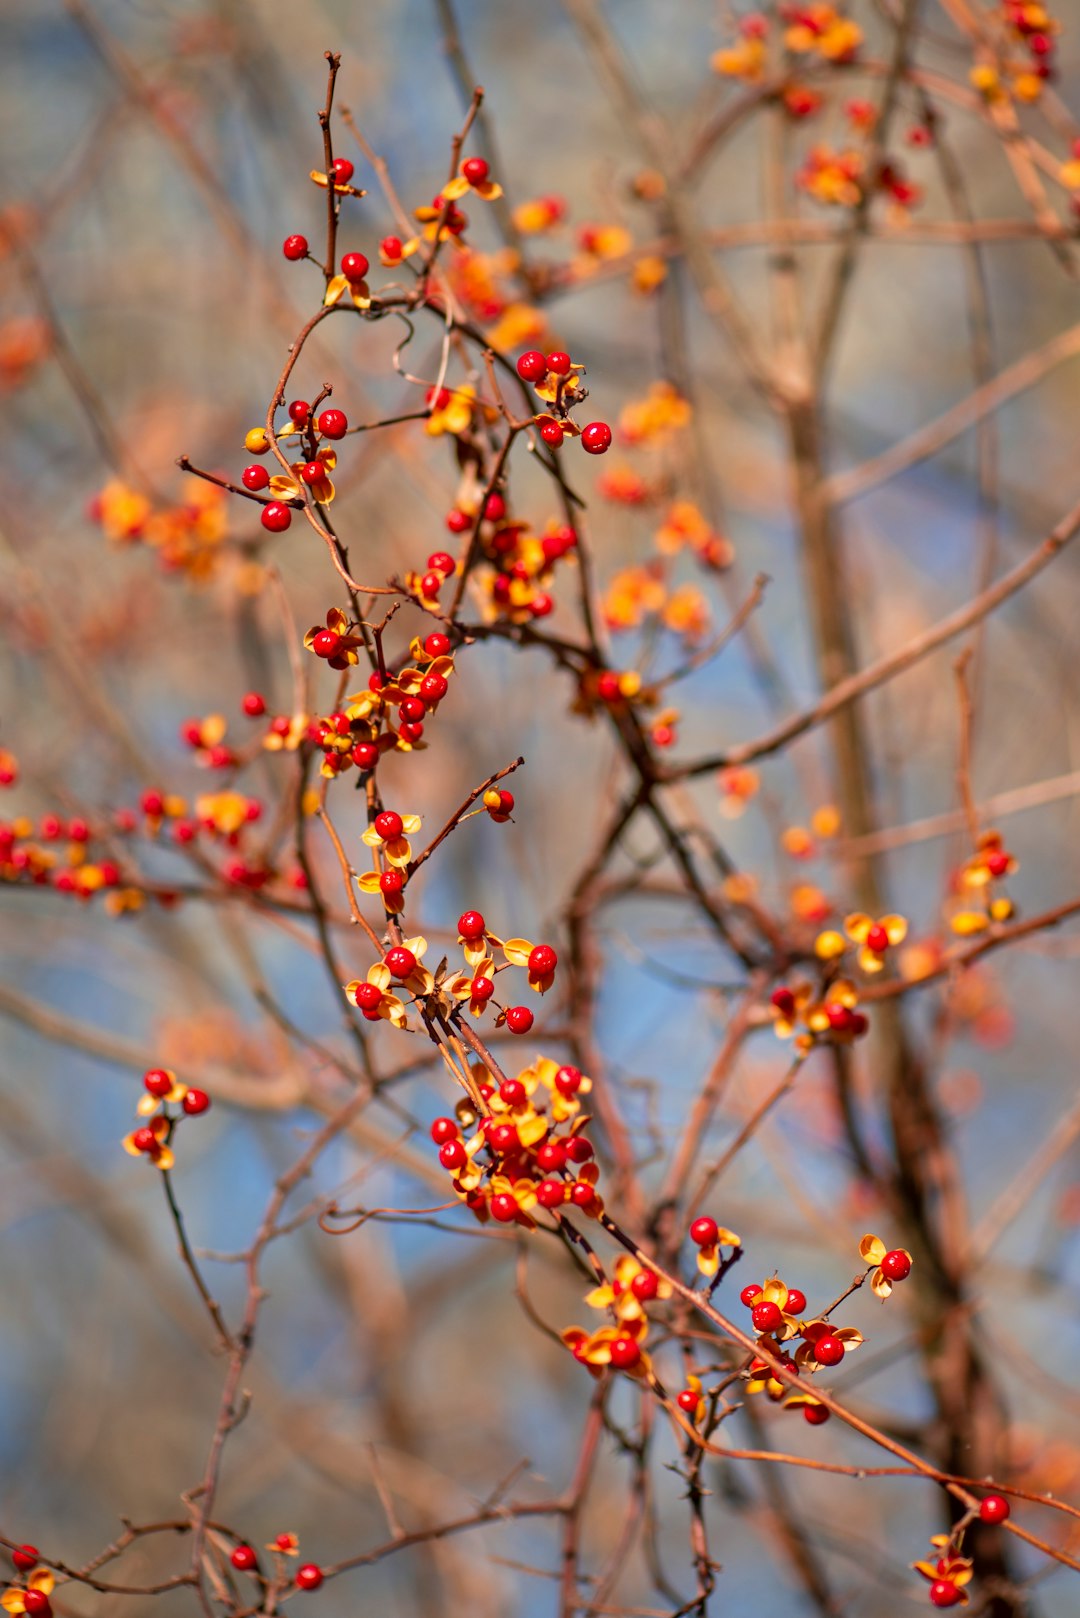 selective focus photo of orange and red berries